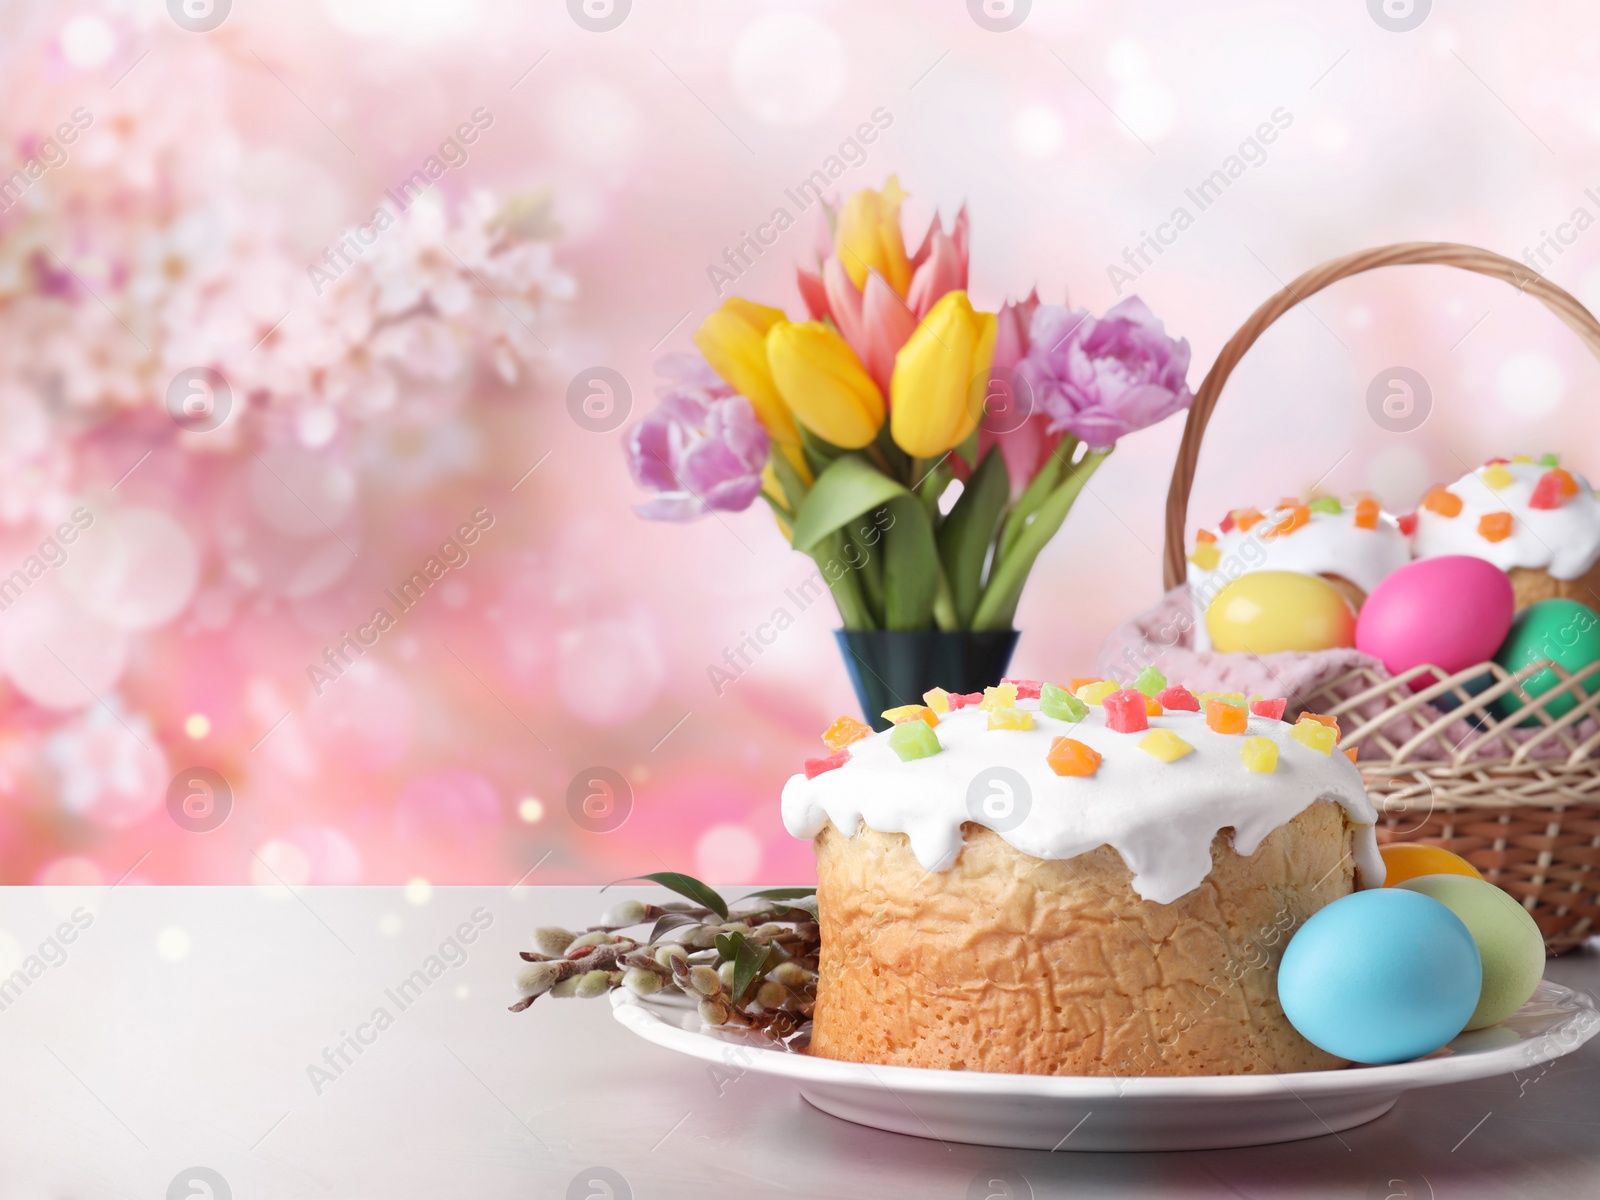 Image of Delicious Easter cakes and painted eggs on light grey table outdoors. Space for text